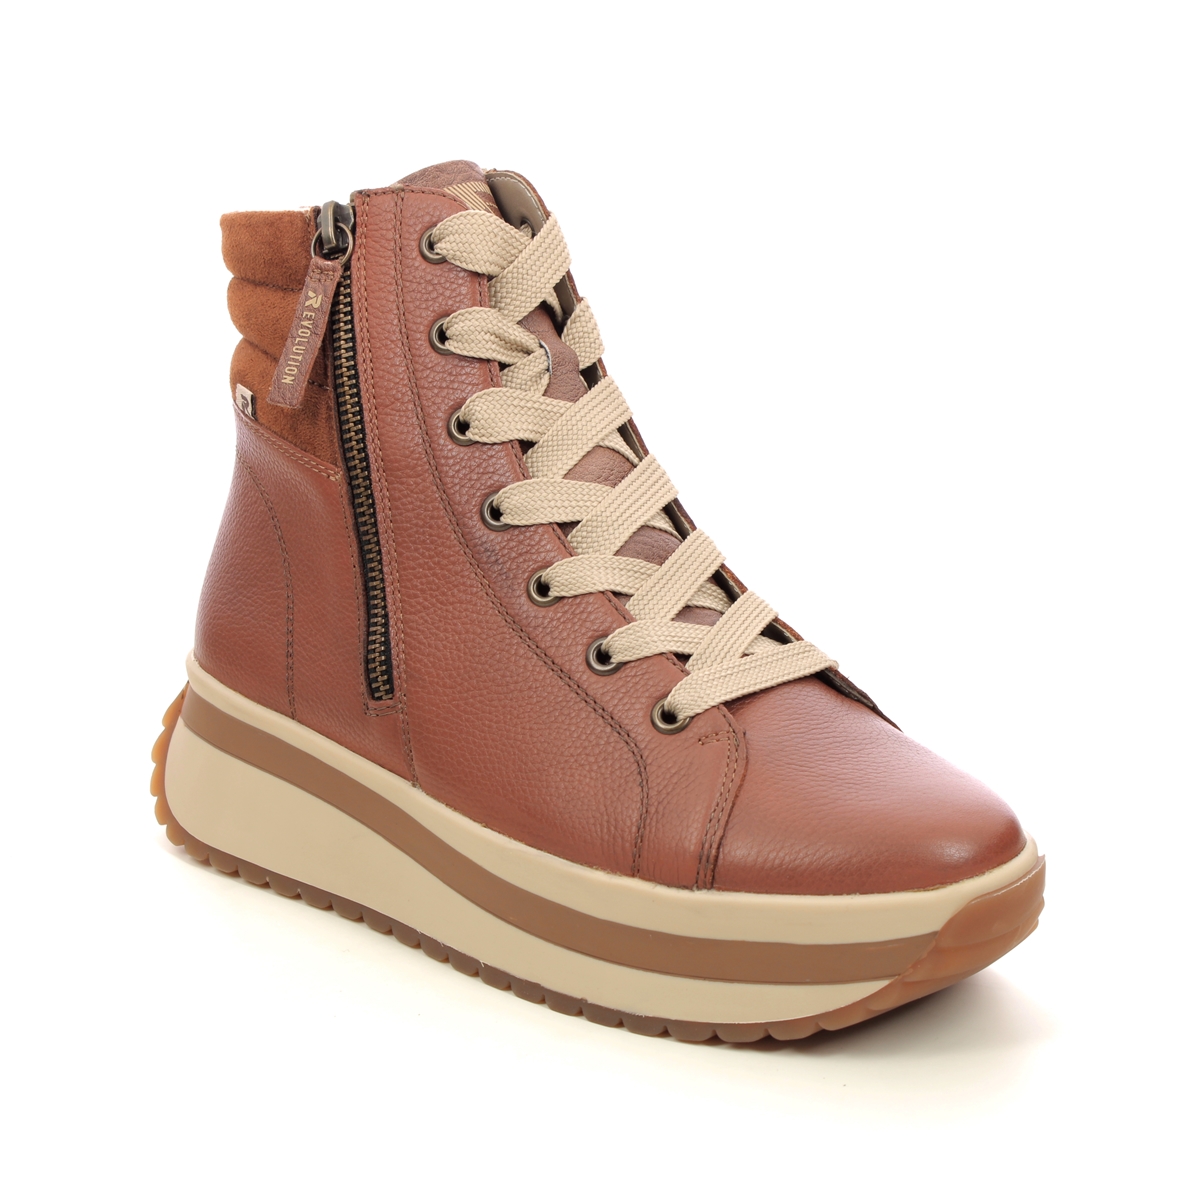 Rieker W0962-24 Tan Leather Womens Hi Tops in a Plain Leather in Size 42